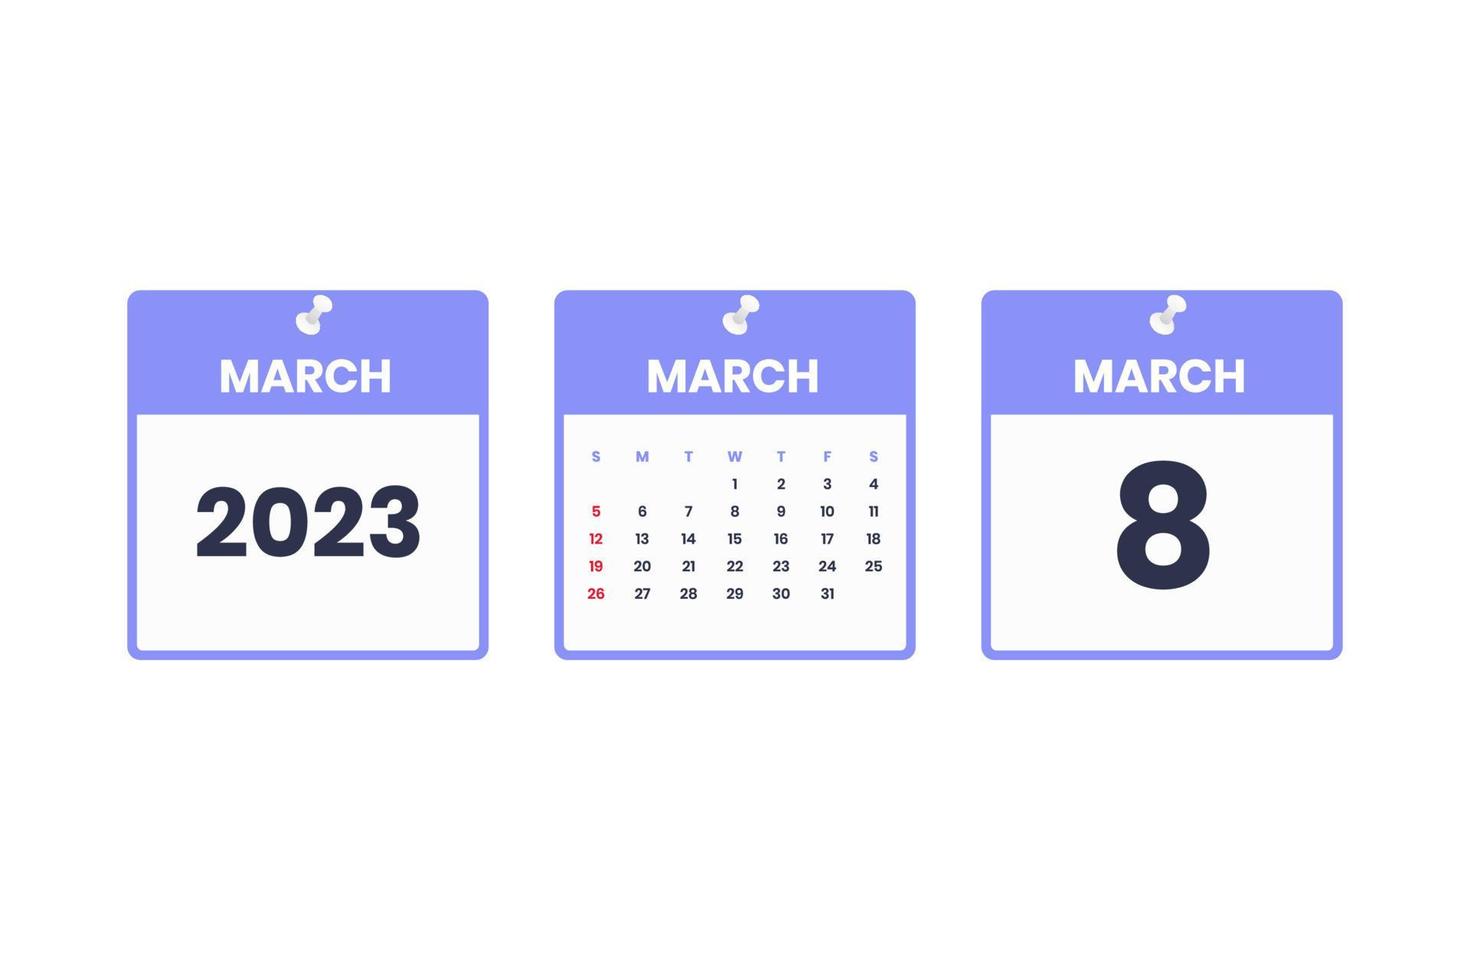 March calendar design. March 8 2023 calendar icon for schedule, appointment, important date concept vector